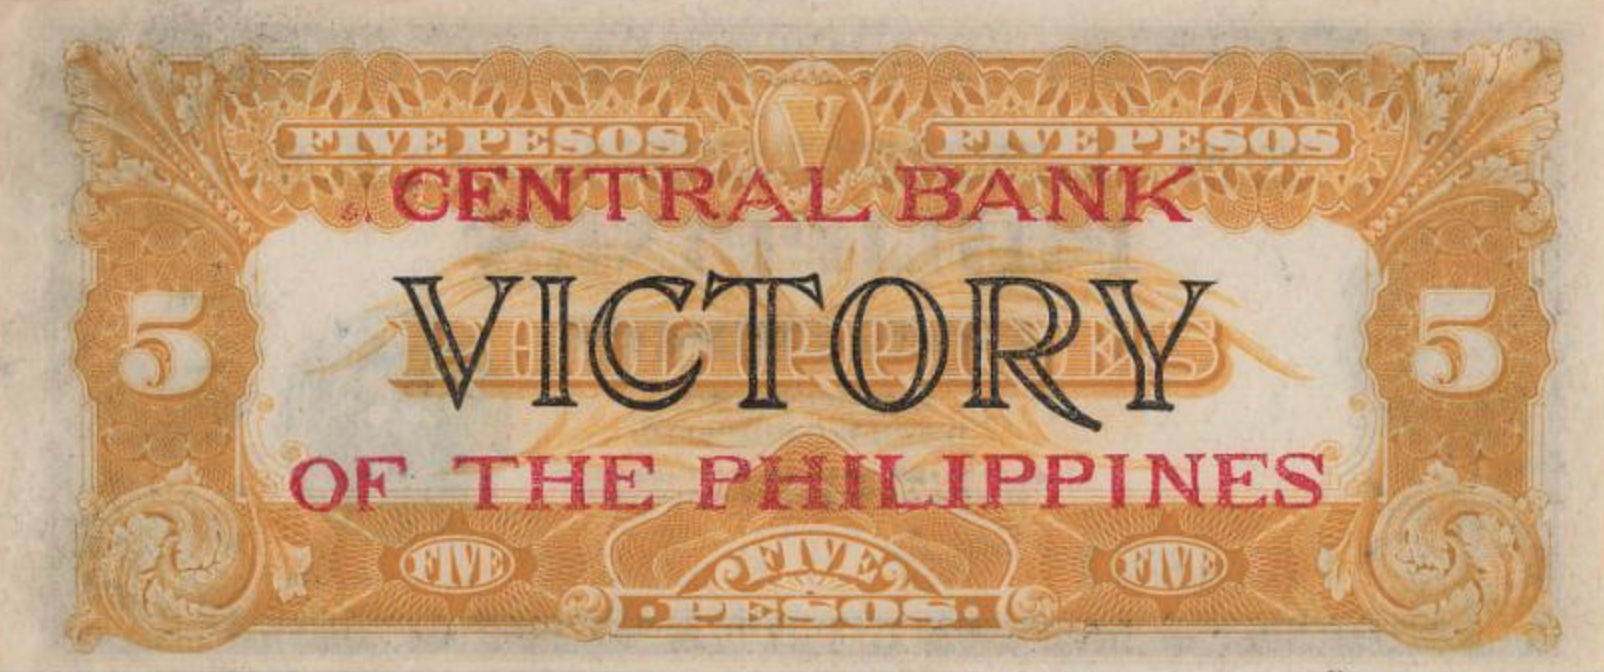 Heavy orange border with white text reading “FIVE PESOS.” Within the border it also says “FIVE PESOS.” Overprinted “VICTORY” in black (center). In red above and below, overprinted “CENTRAL BANK / OF THE PHILIPPINES.”